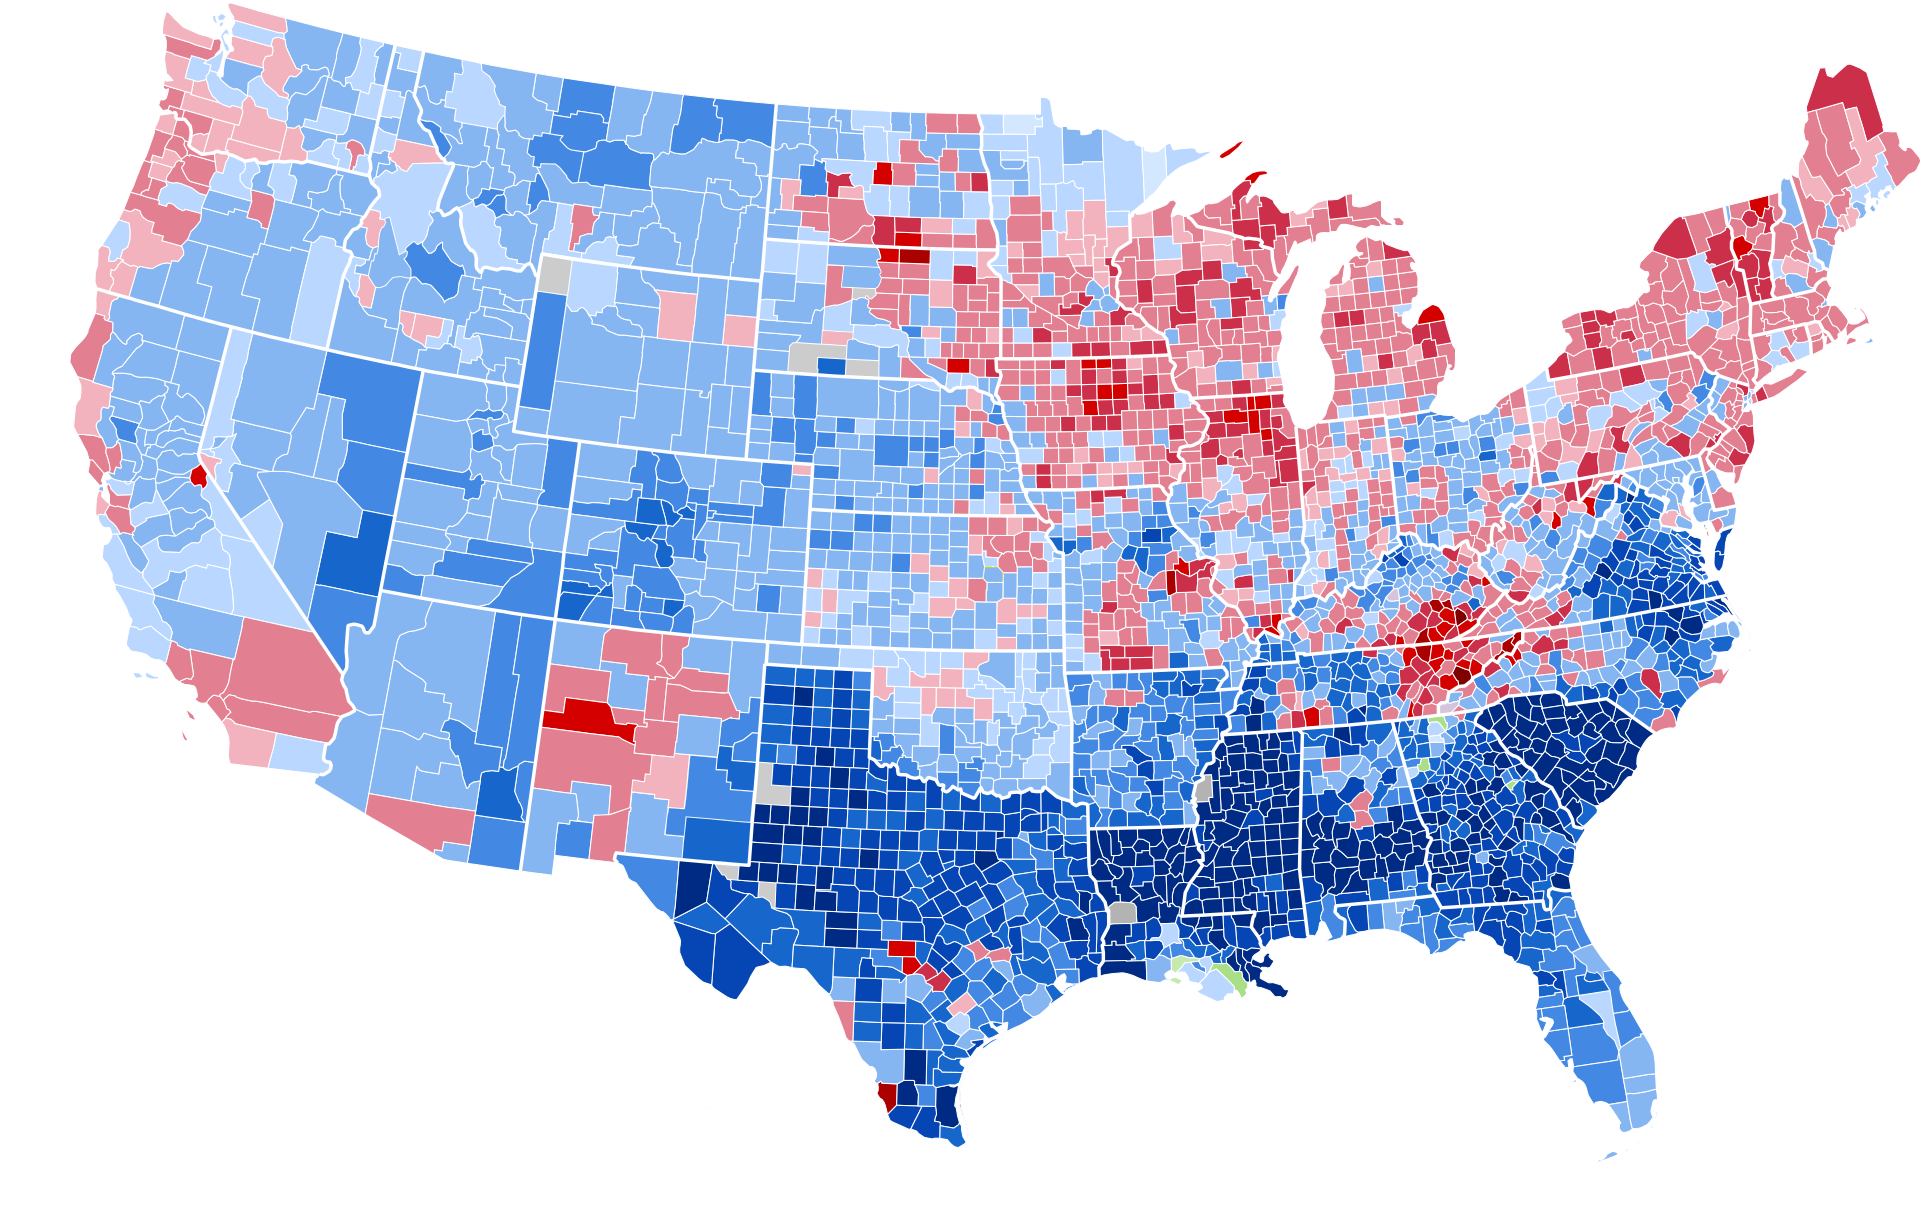 1920px-1916_United_States_presidential_election_results_map_by_county.svg.png